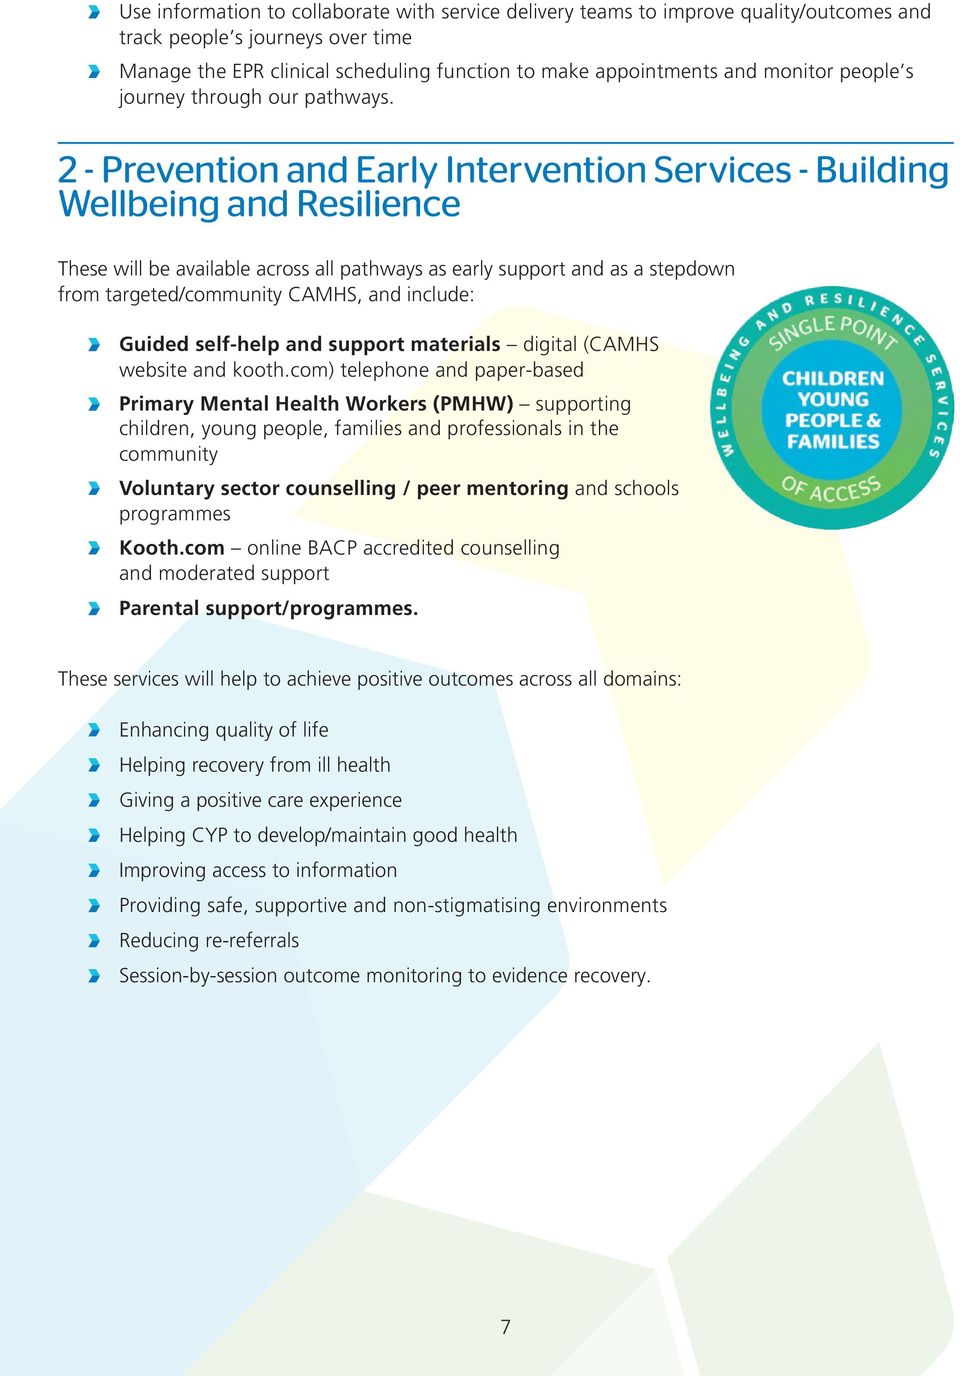 2 - Prevention and Early Intervention Services - Building Wellbeing and Resilience These will be available across all pathways as early support and as a stepdown from targeted/community CAMHS, and